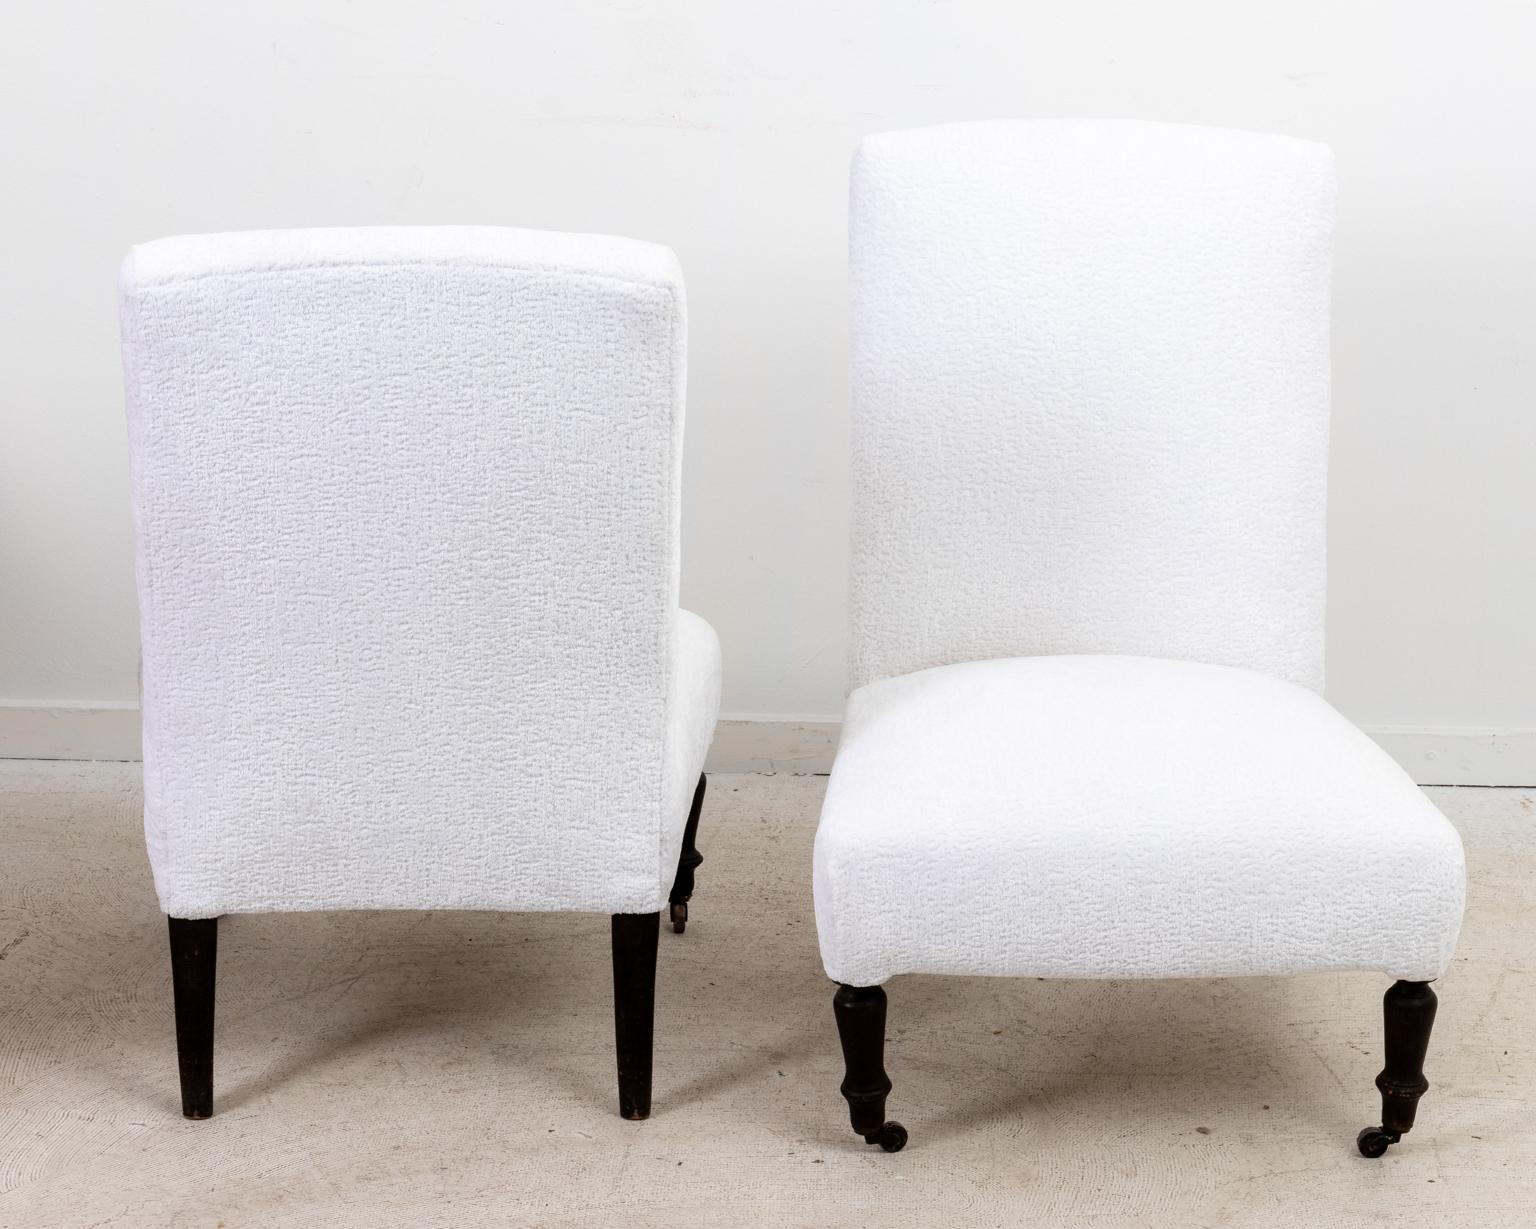 Upholstery Pair of English Chairs